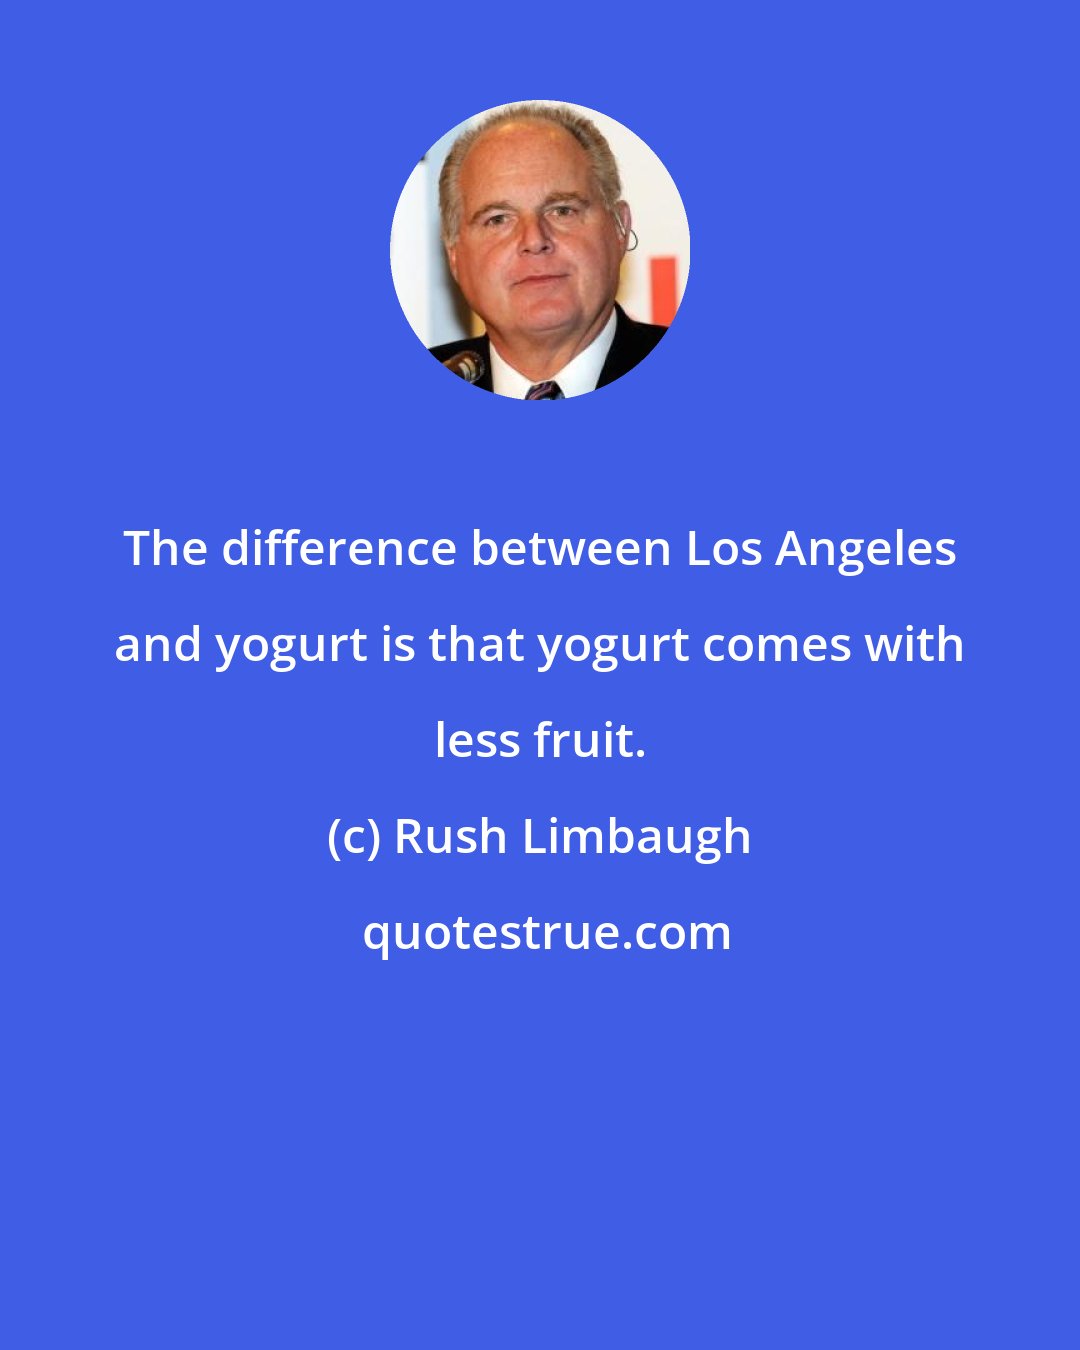 Rush Limbaugh: The difference between Los Angeles and yogurt is that yogurt comes with less fruit.